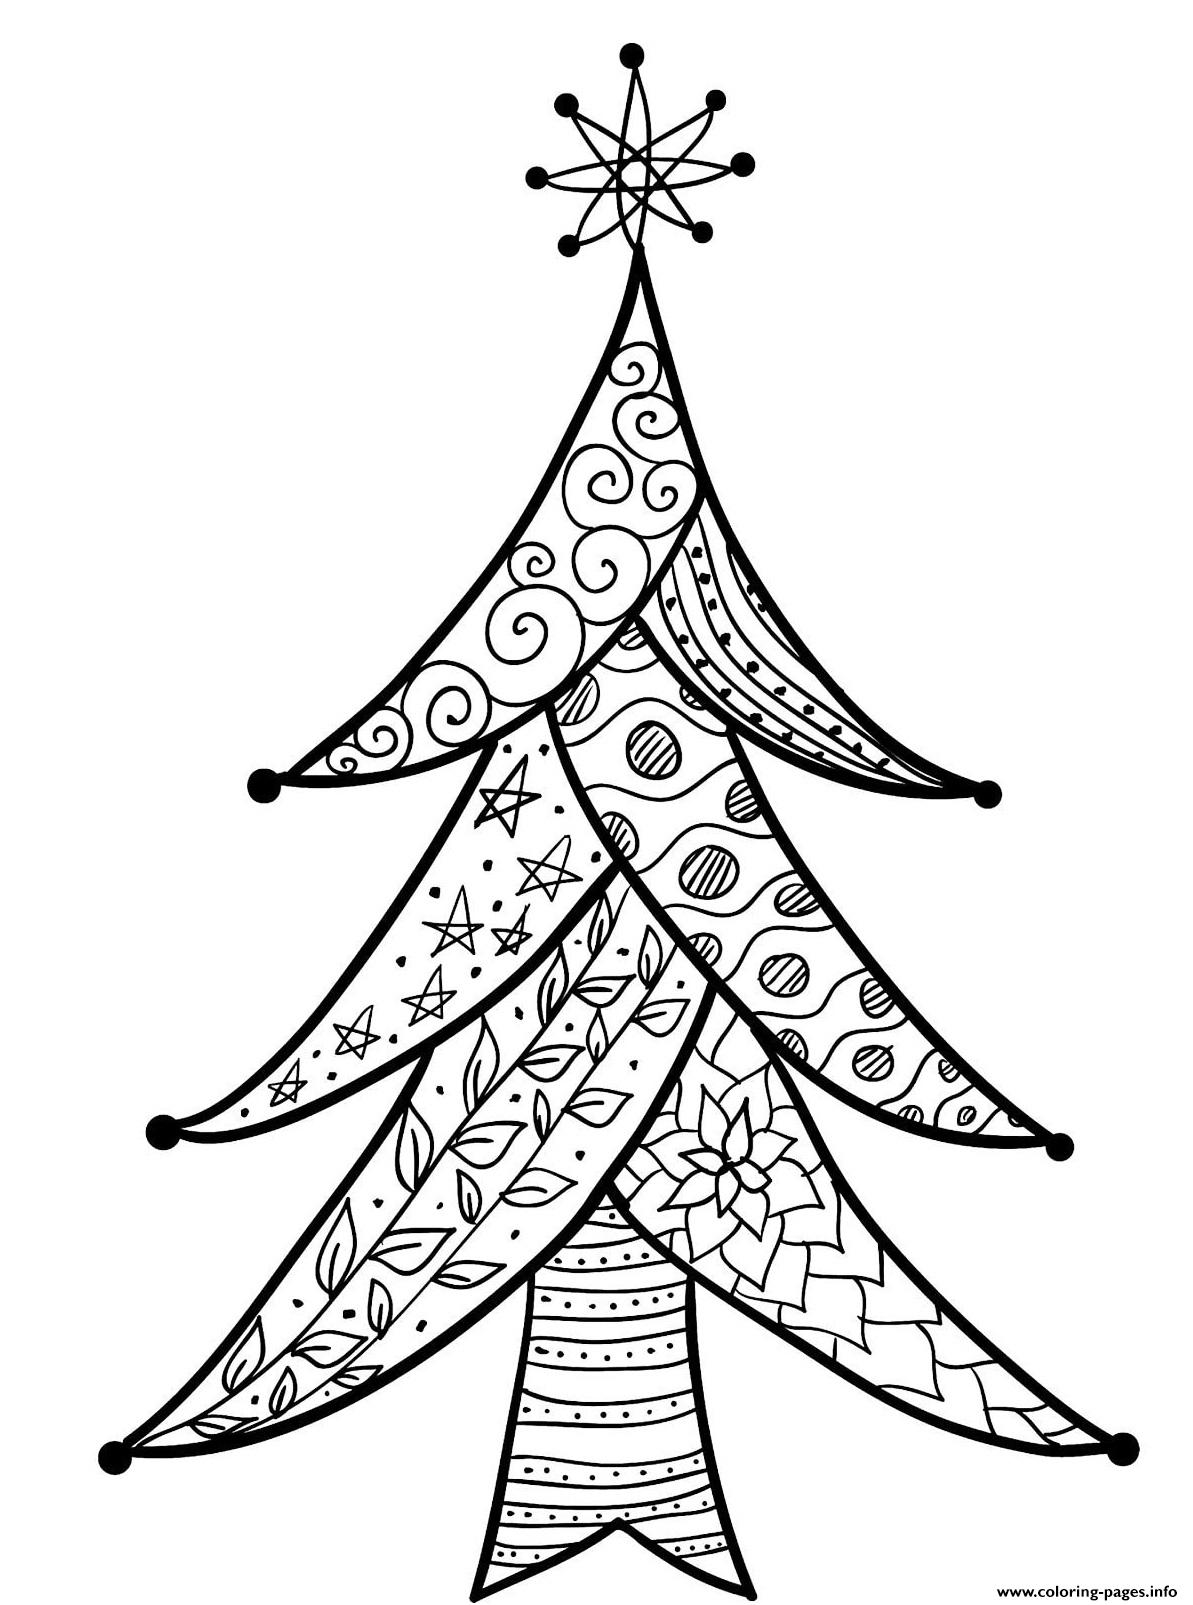 pretty-patterns-on-a-christmas-tree-coloring-page-printable